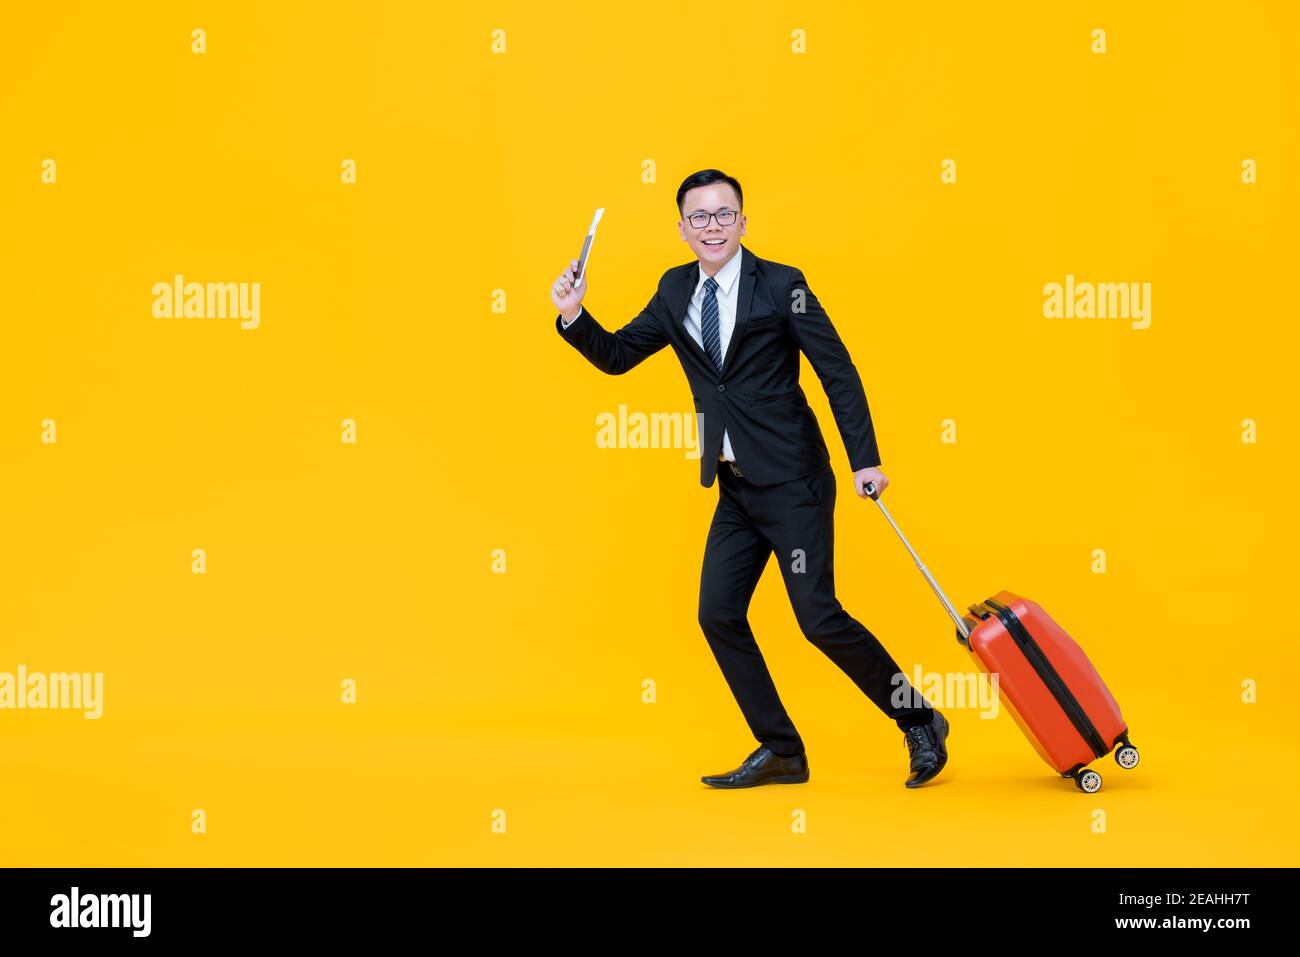 Full body of Asian man in formal business suit with baggae passport and boarding pass ready to go for traveling isolated on yellow background Stock Photo